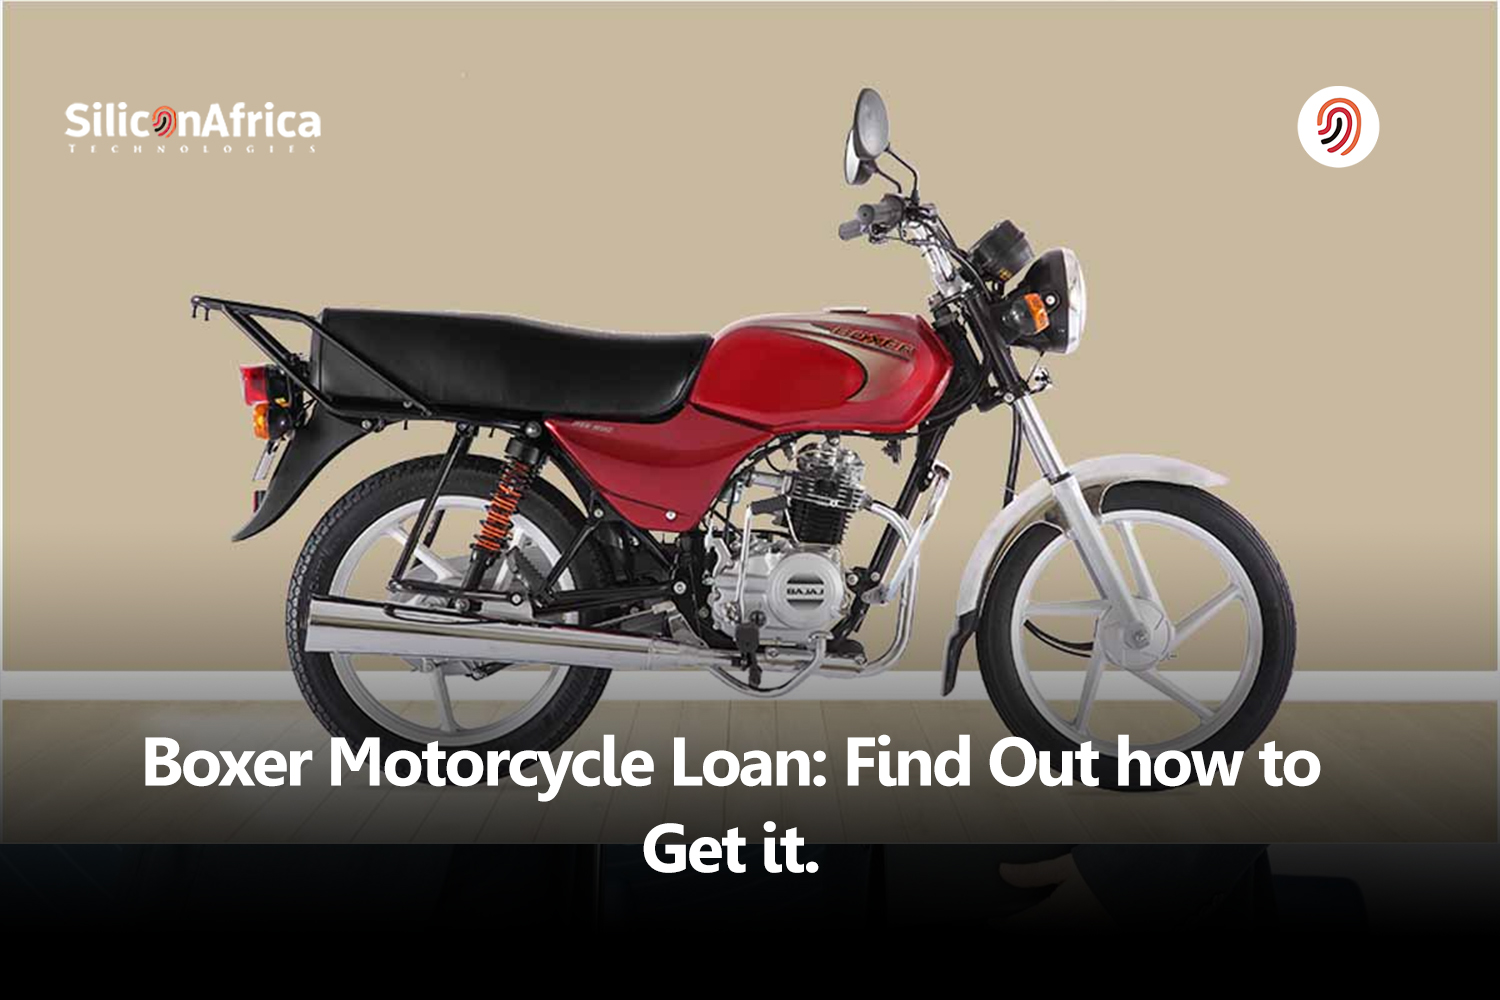 Boxer Motorcycle Loan: Find Out How to Get It